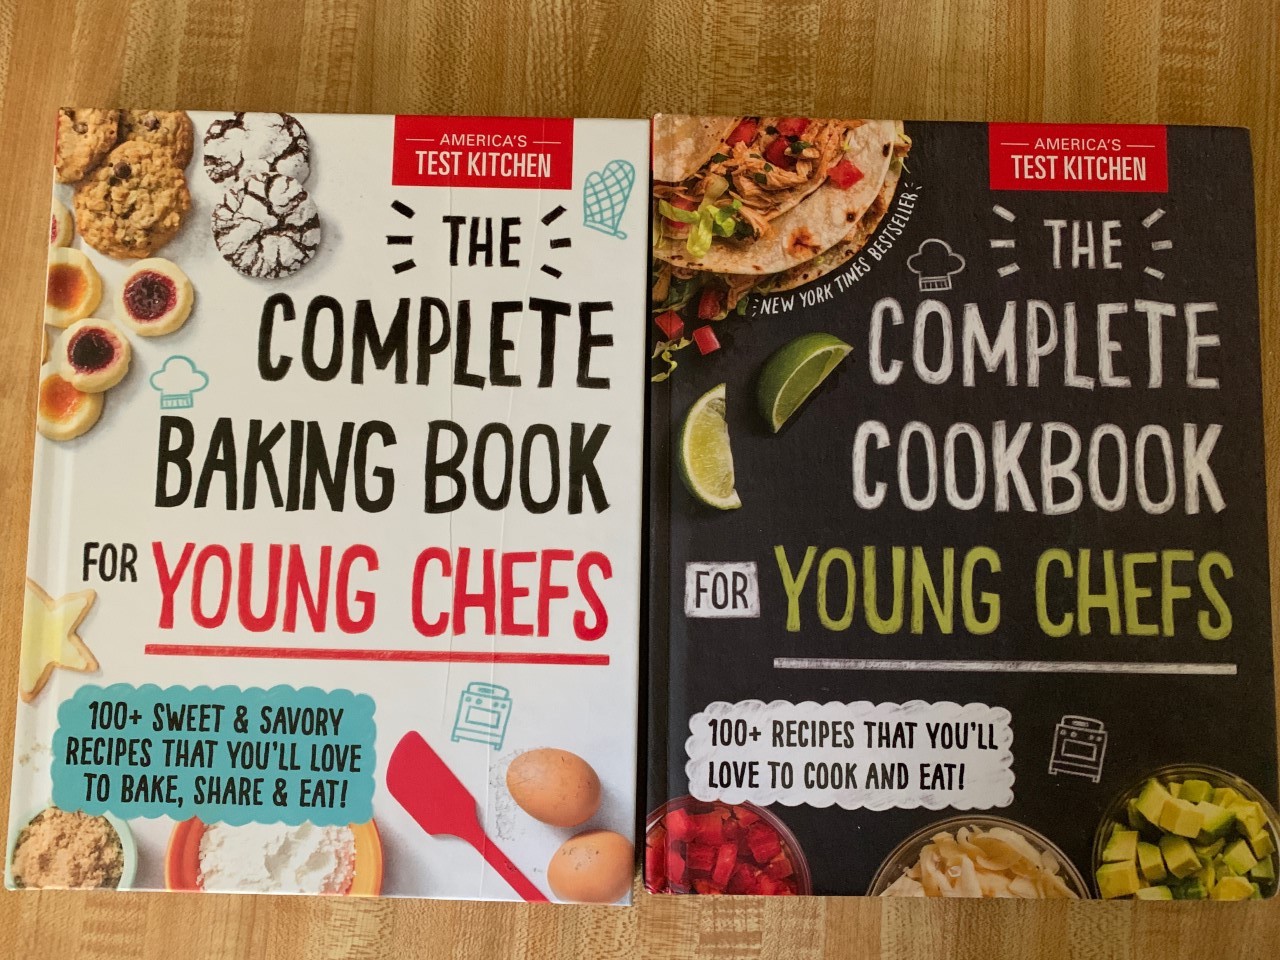 Two cookbooks marketed towards children